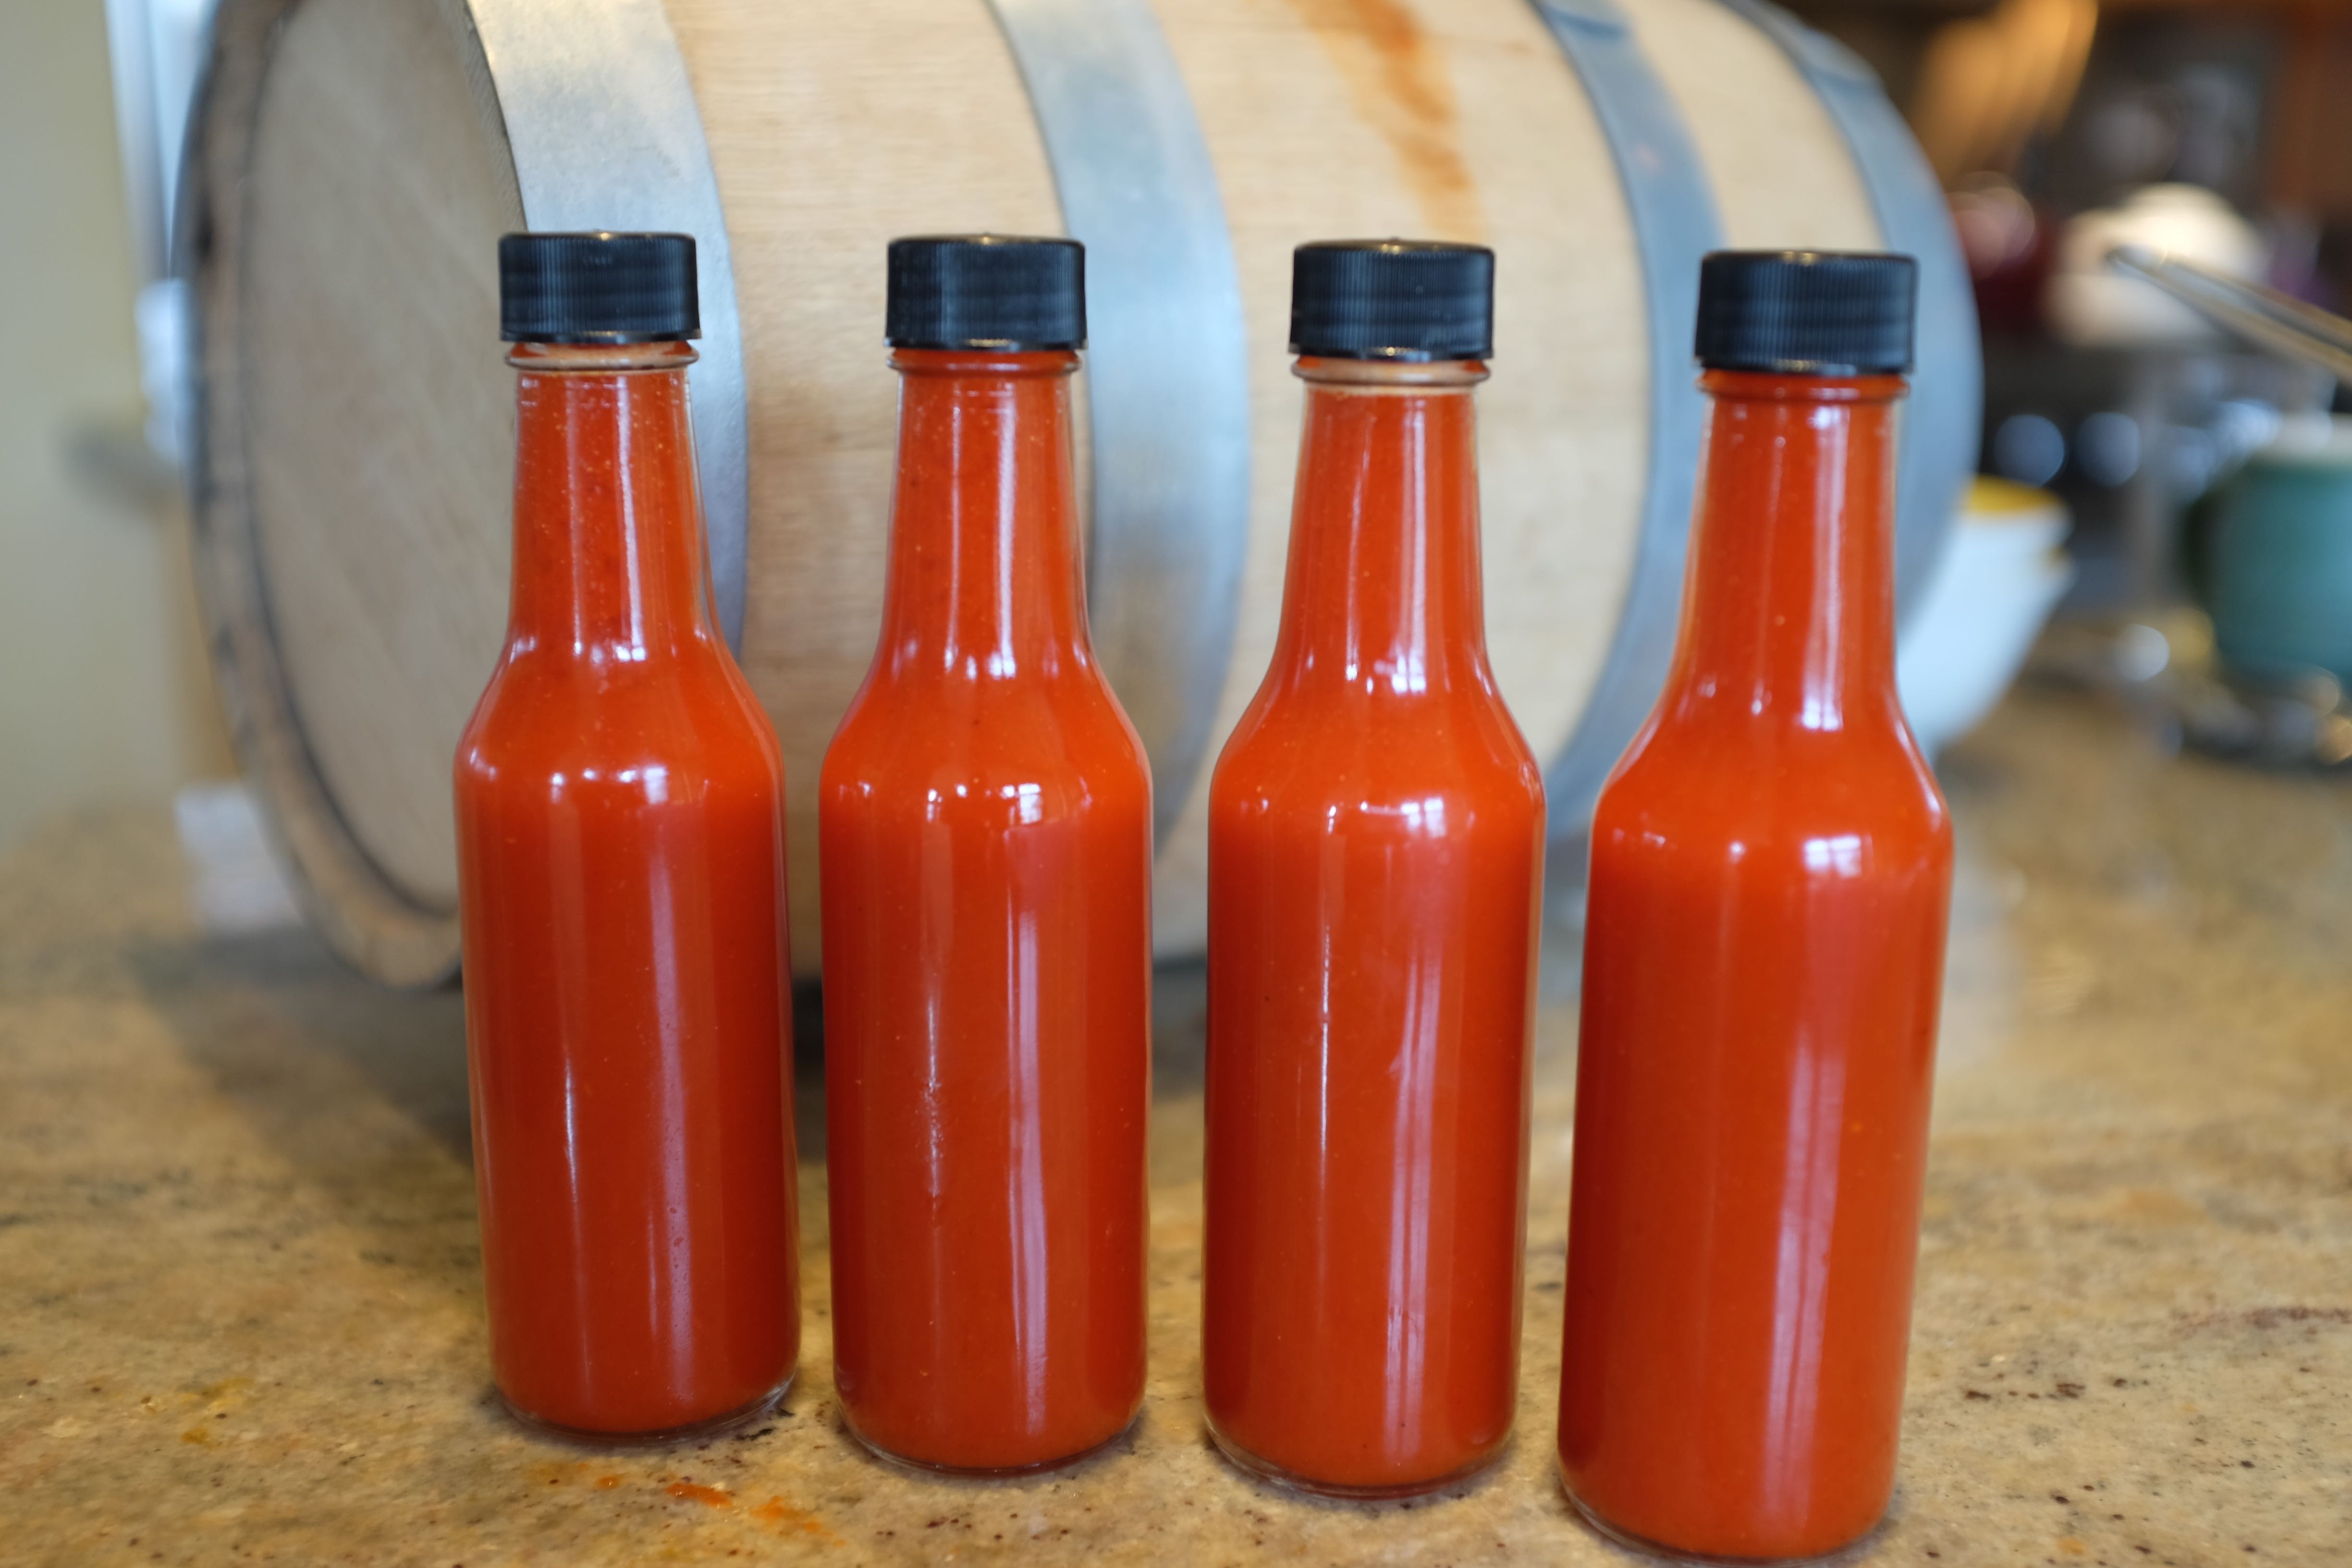 Harvest and Ferment Your Own Simple Hot Sauce